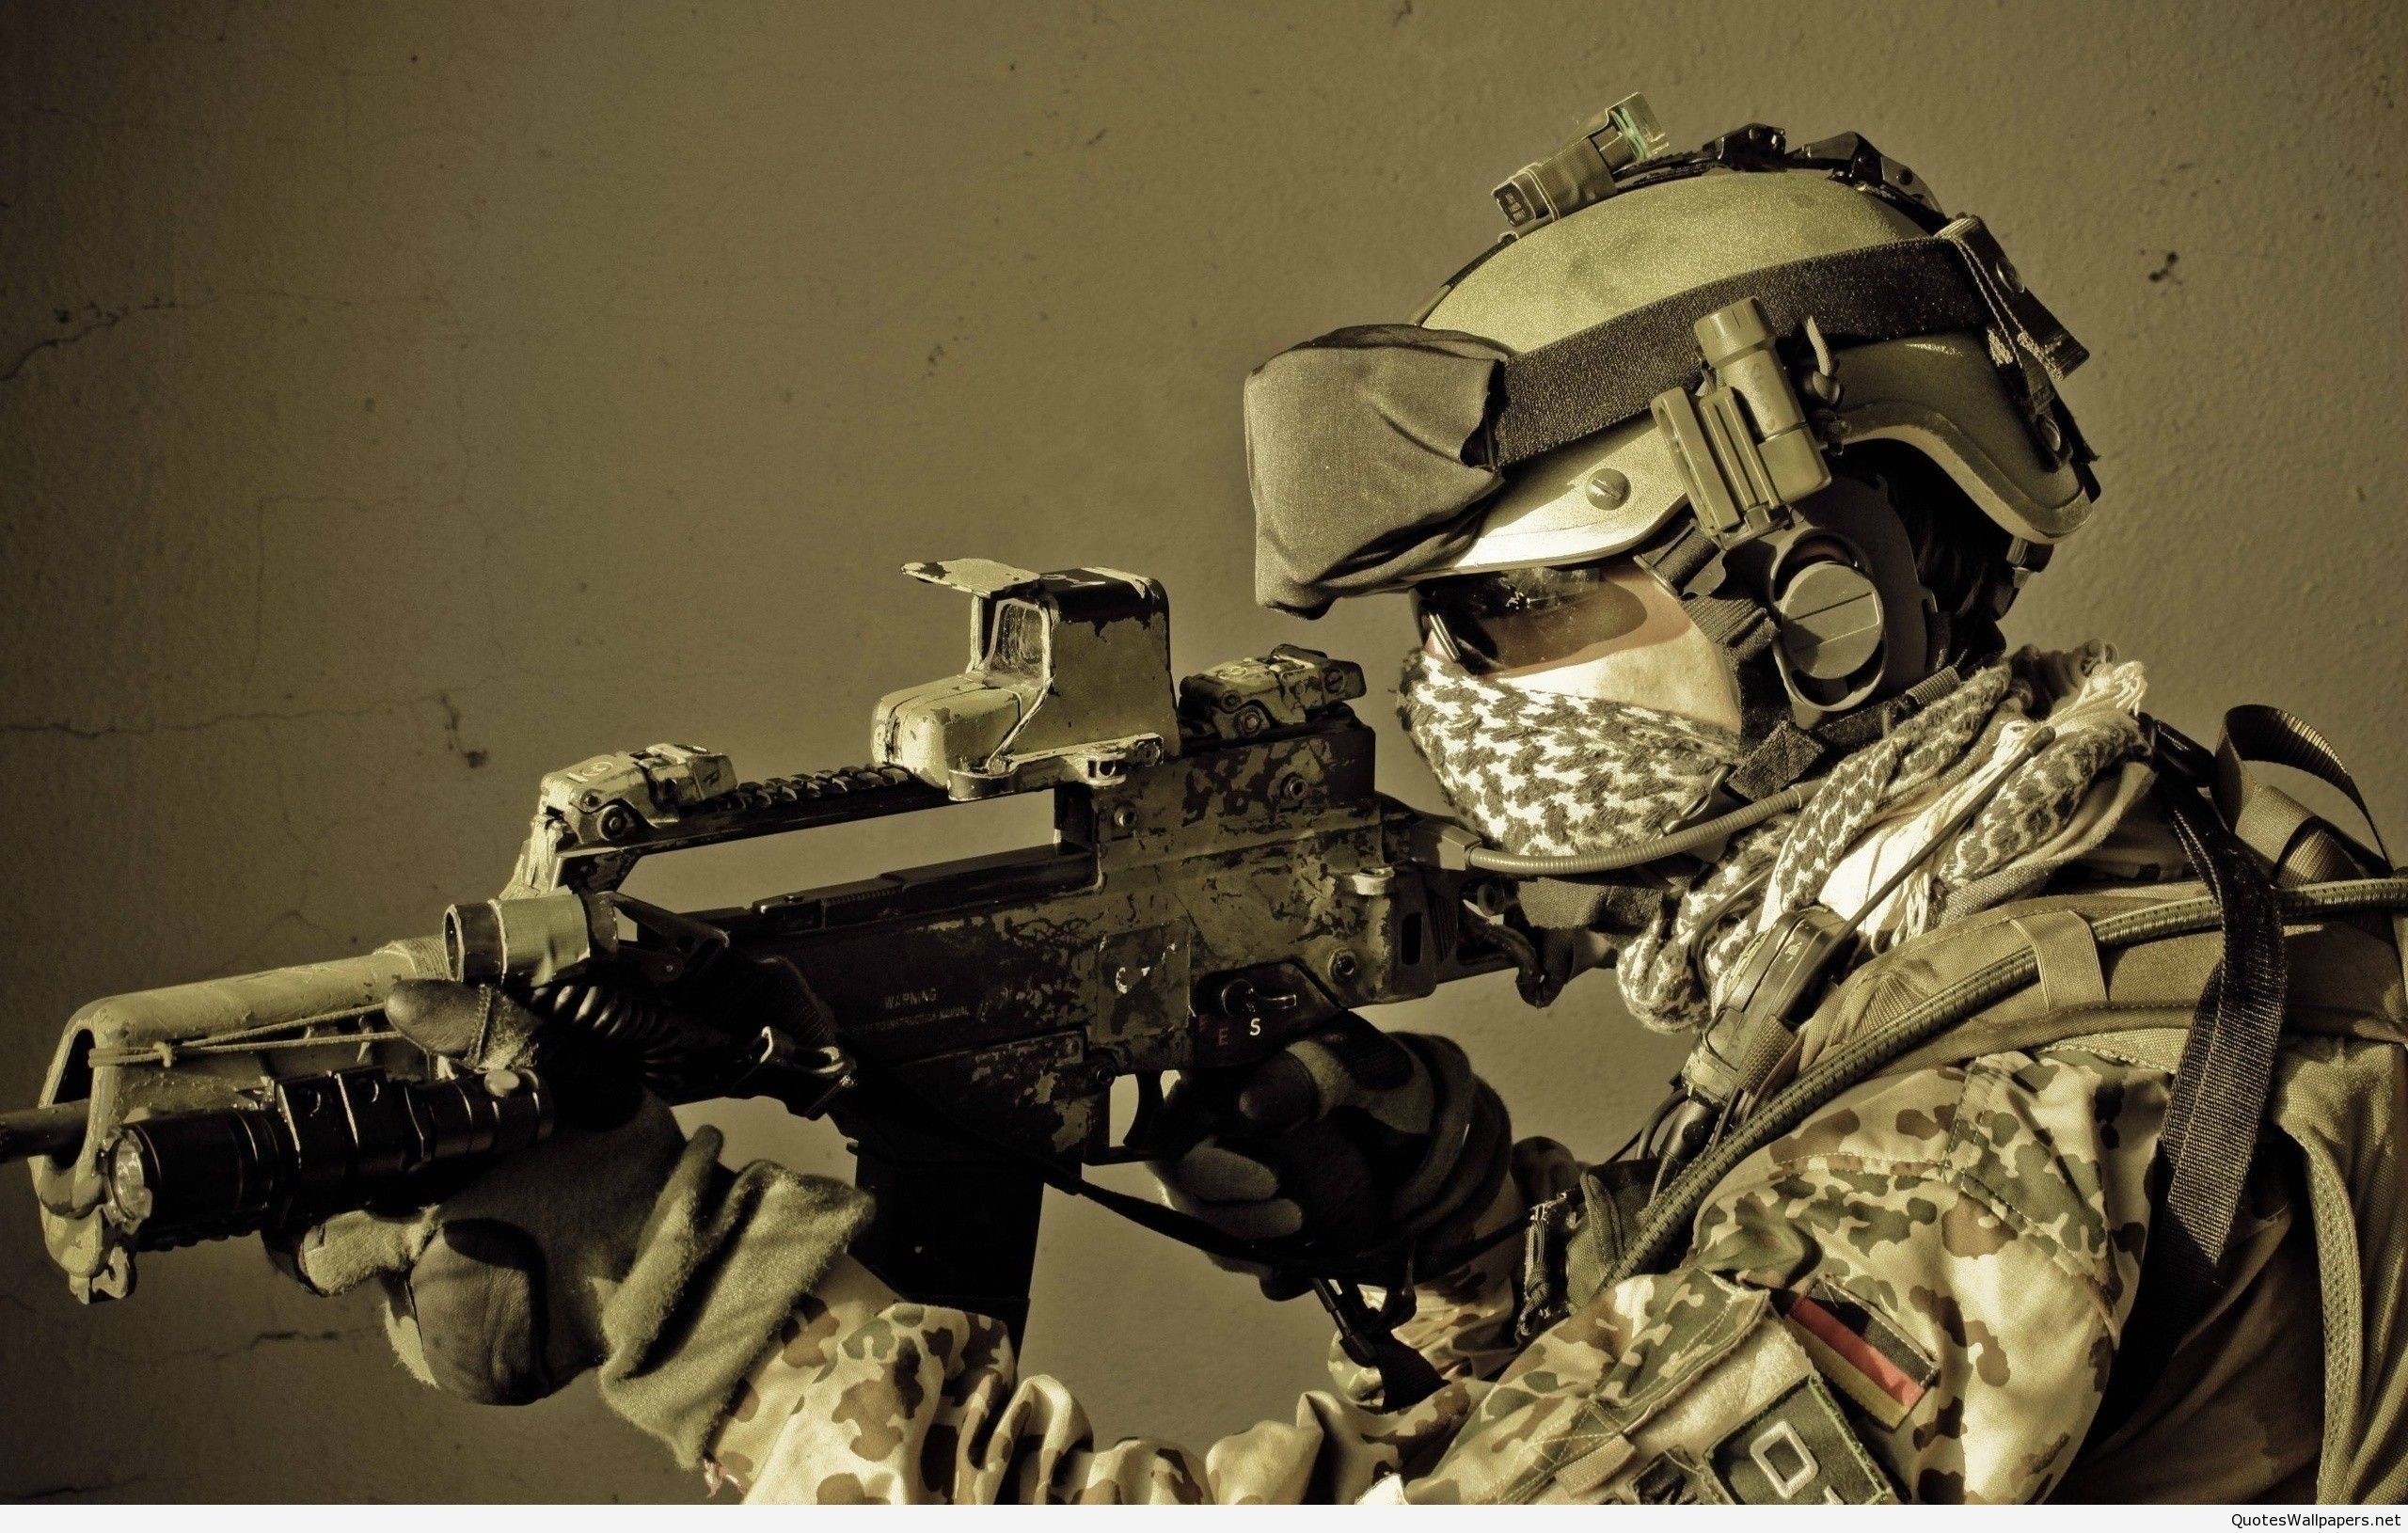 Featured image for “This Navy SEAL/SOF Combat Gear List has several items civilians can use”